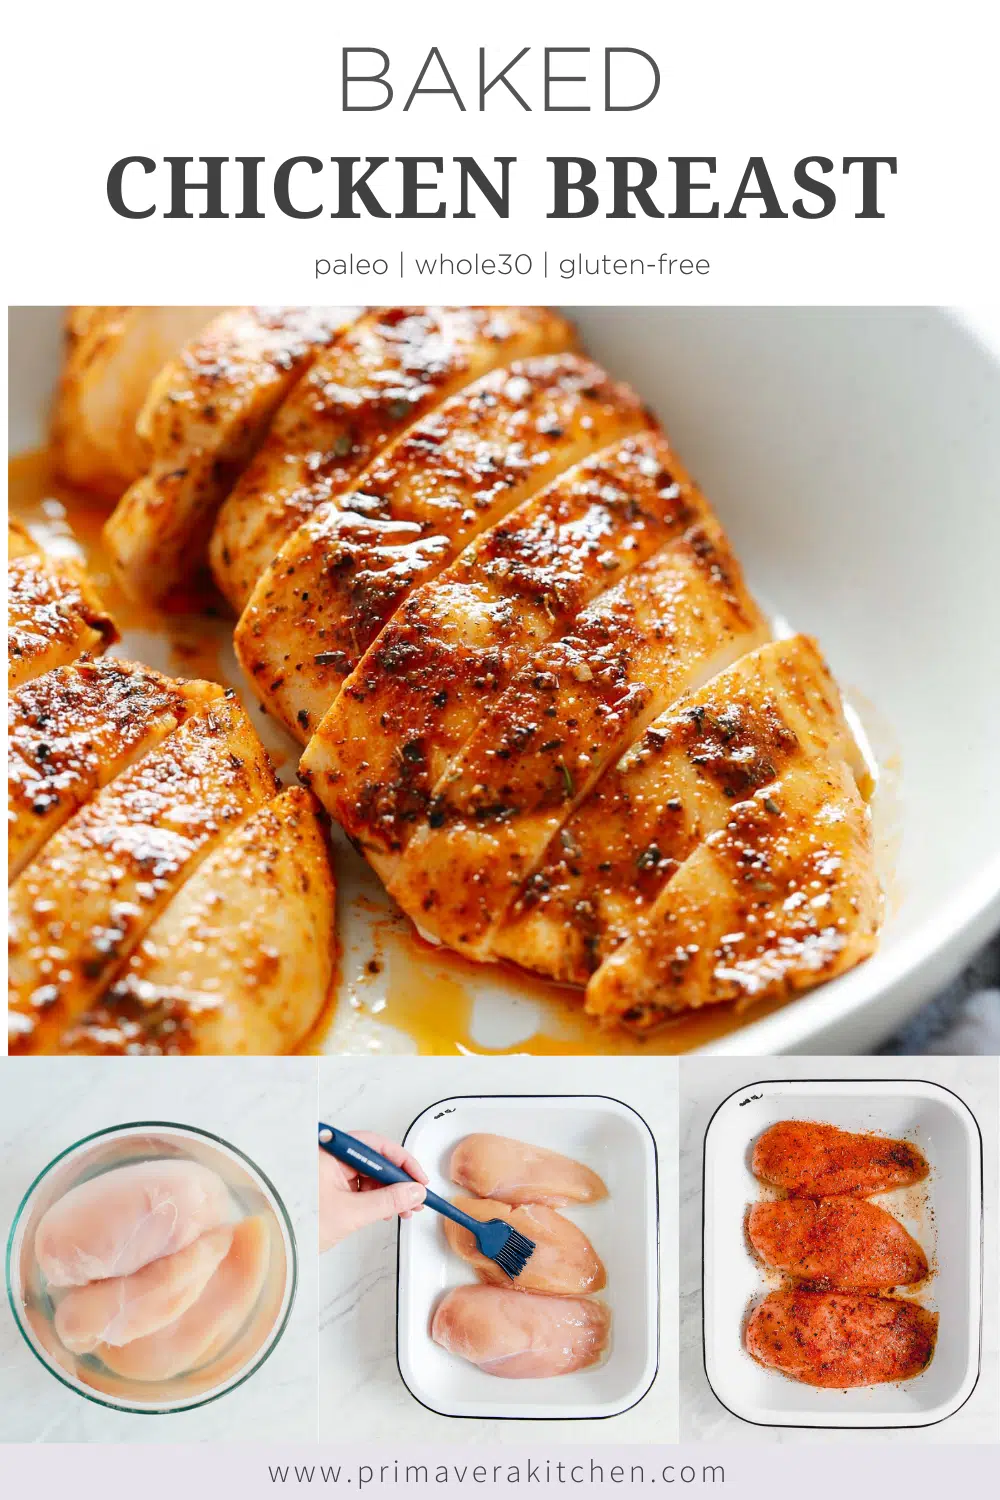 titled photo collage (and shown): Baked chicken breast